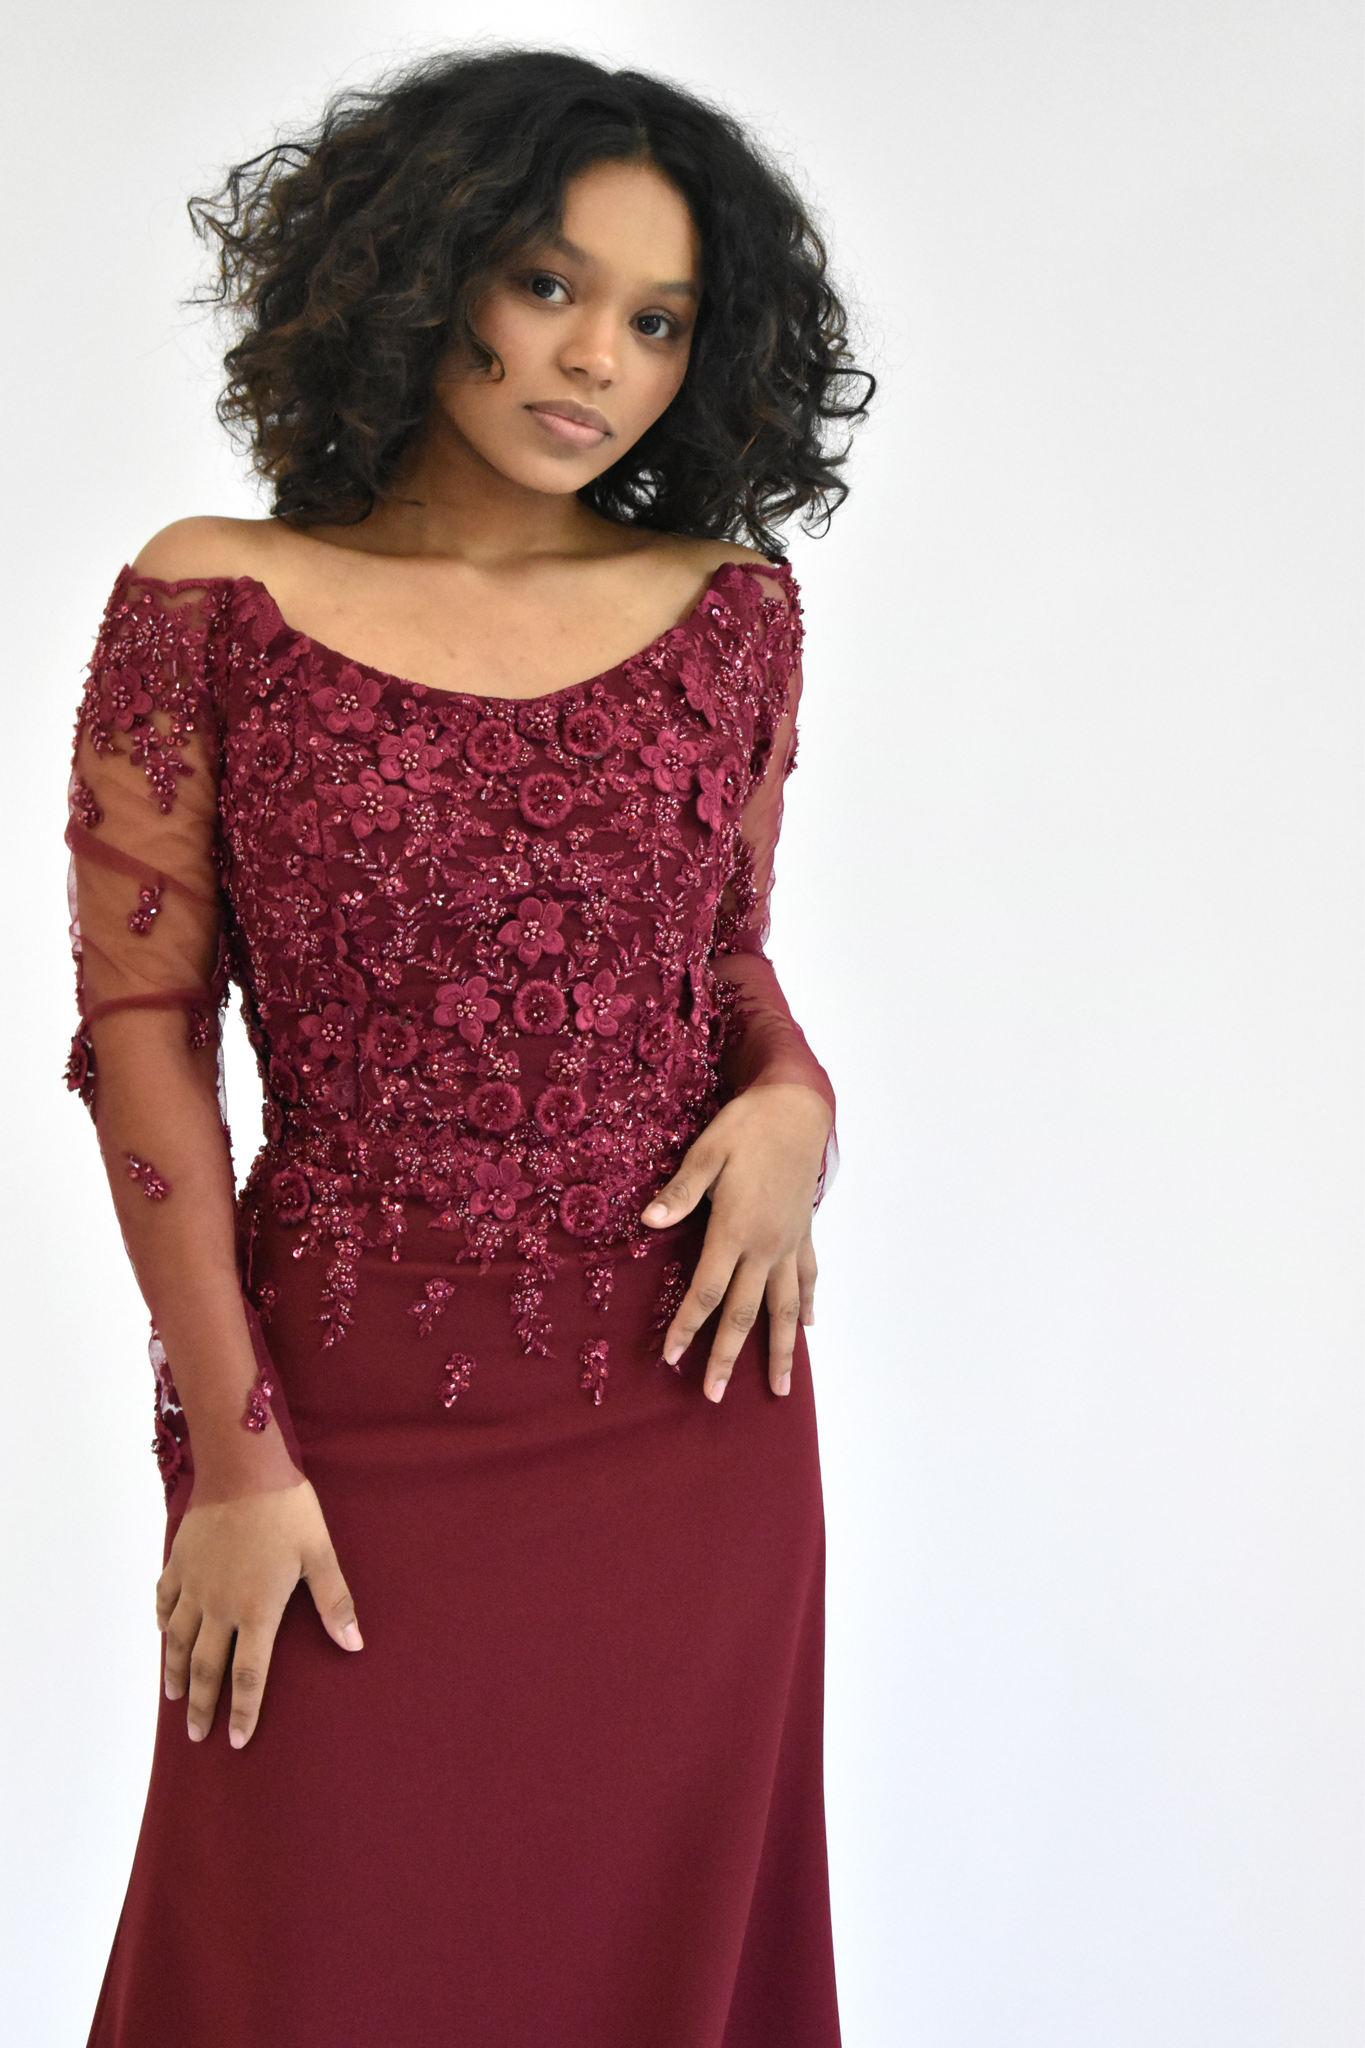 WINE MERMAID CREPE DRESS WITH LONG SLEEVES WITH EMBROIDERY DETAILS